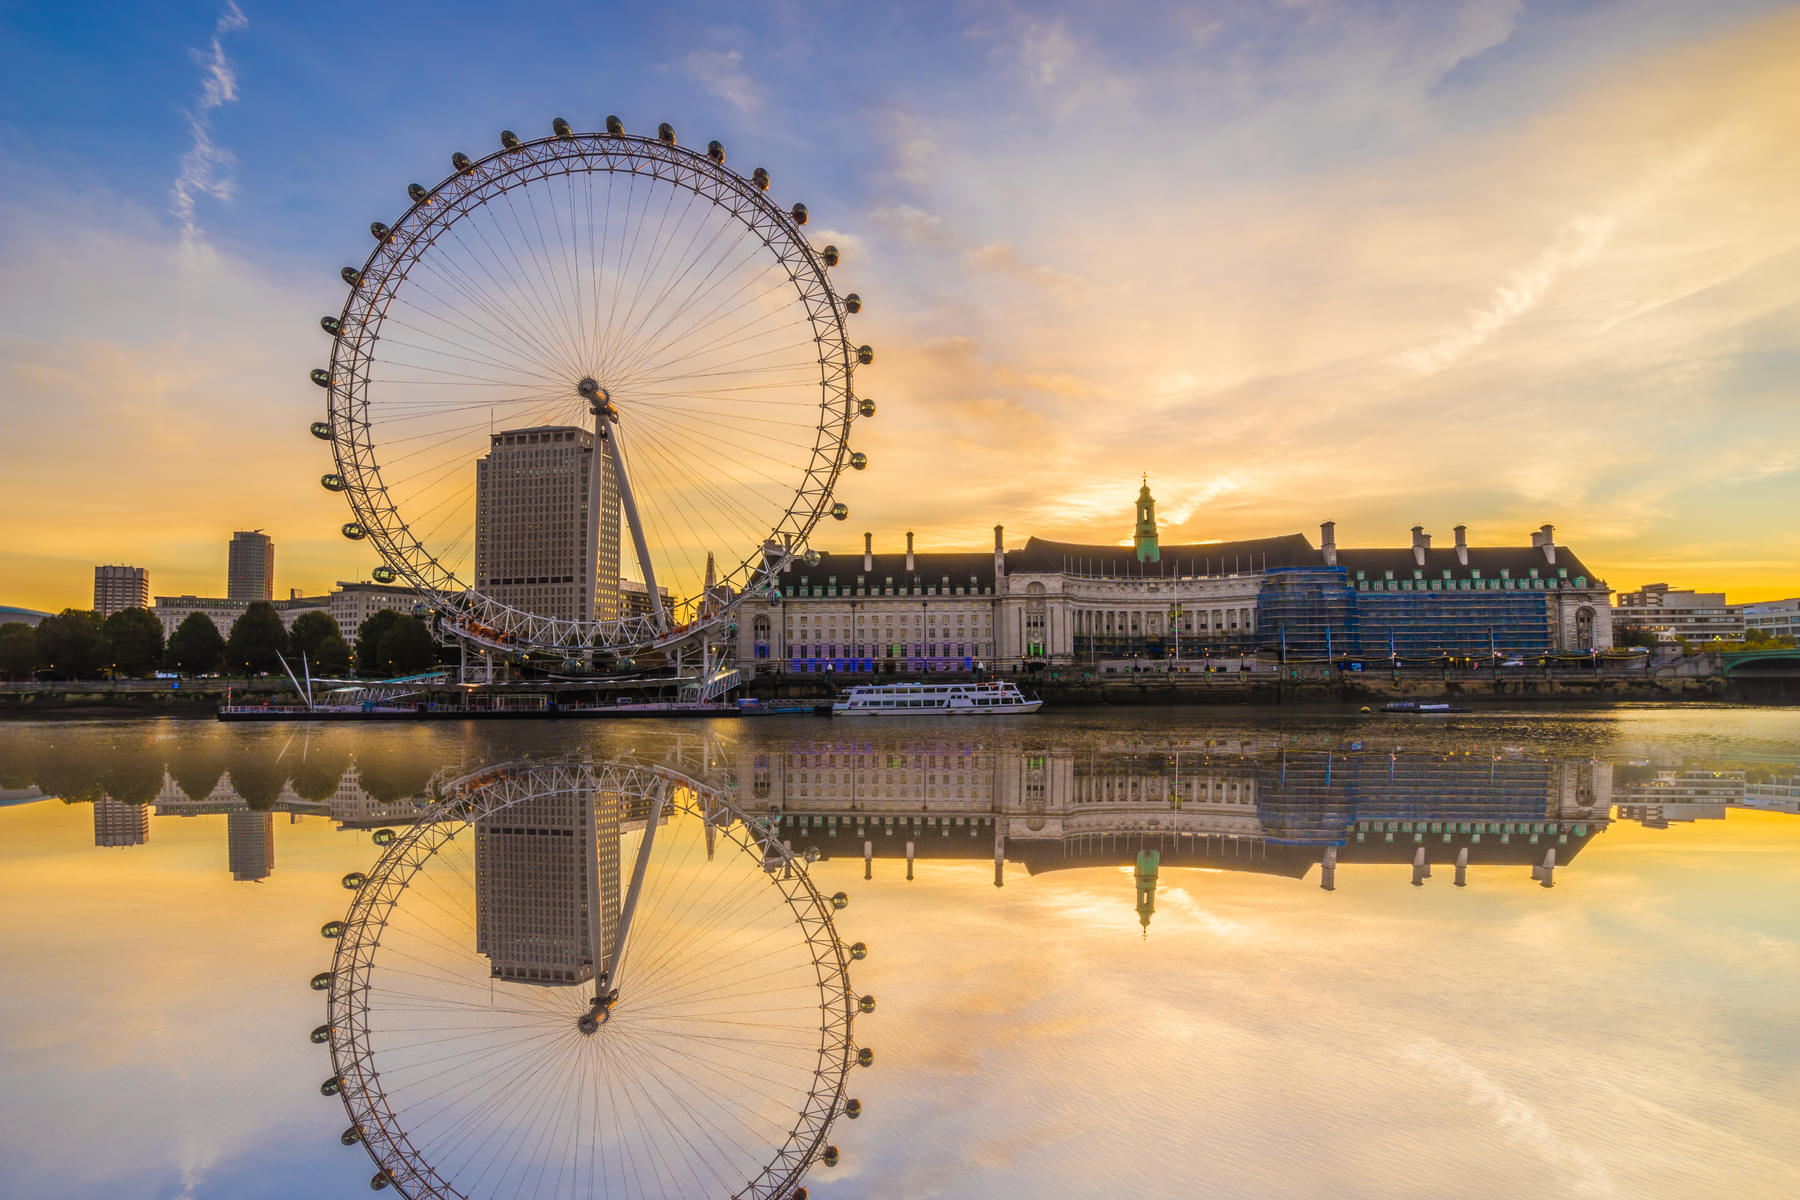 The London Eye standing tall amidst the city's vibrant skyline.